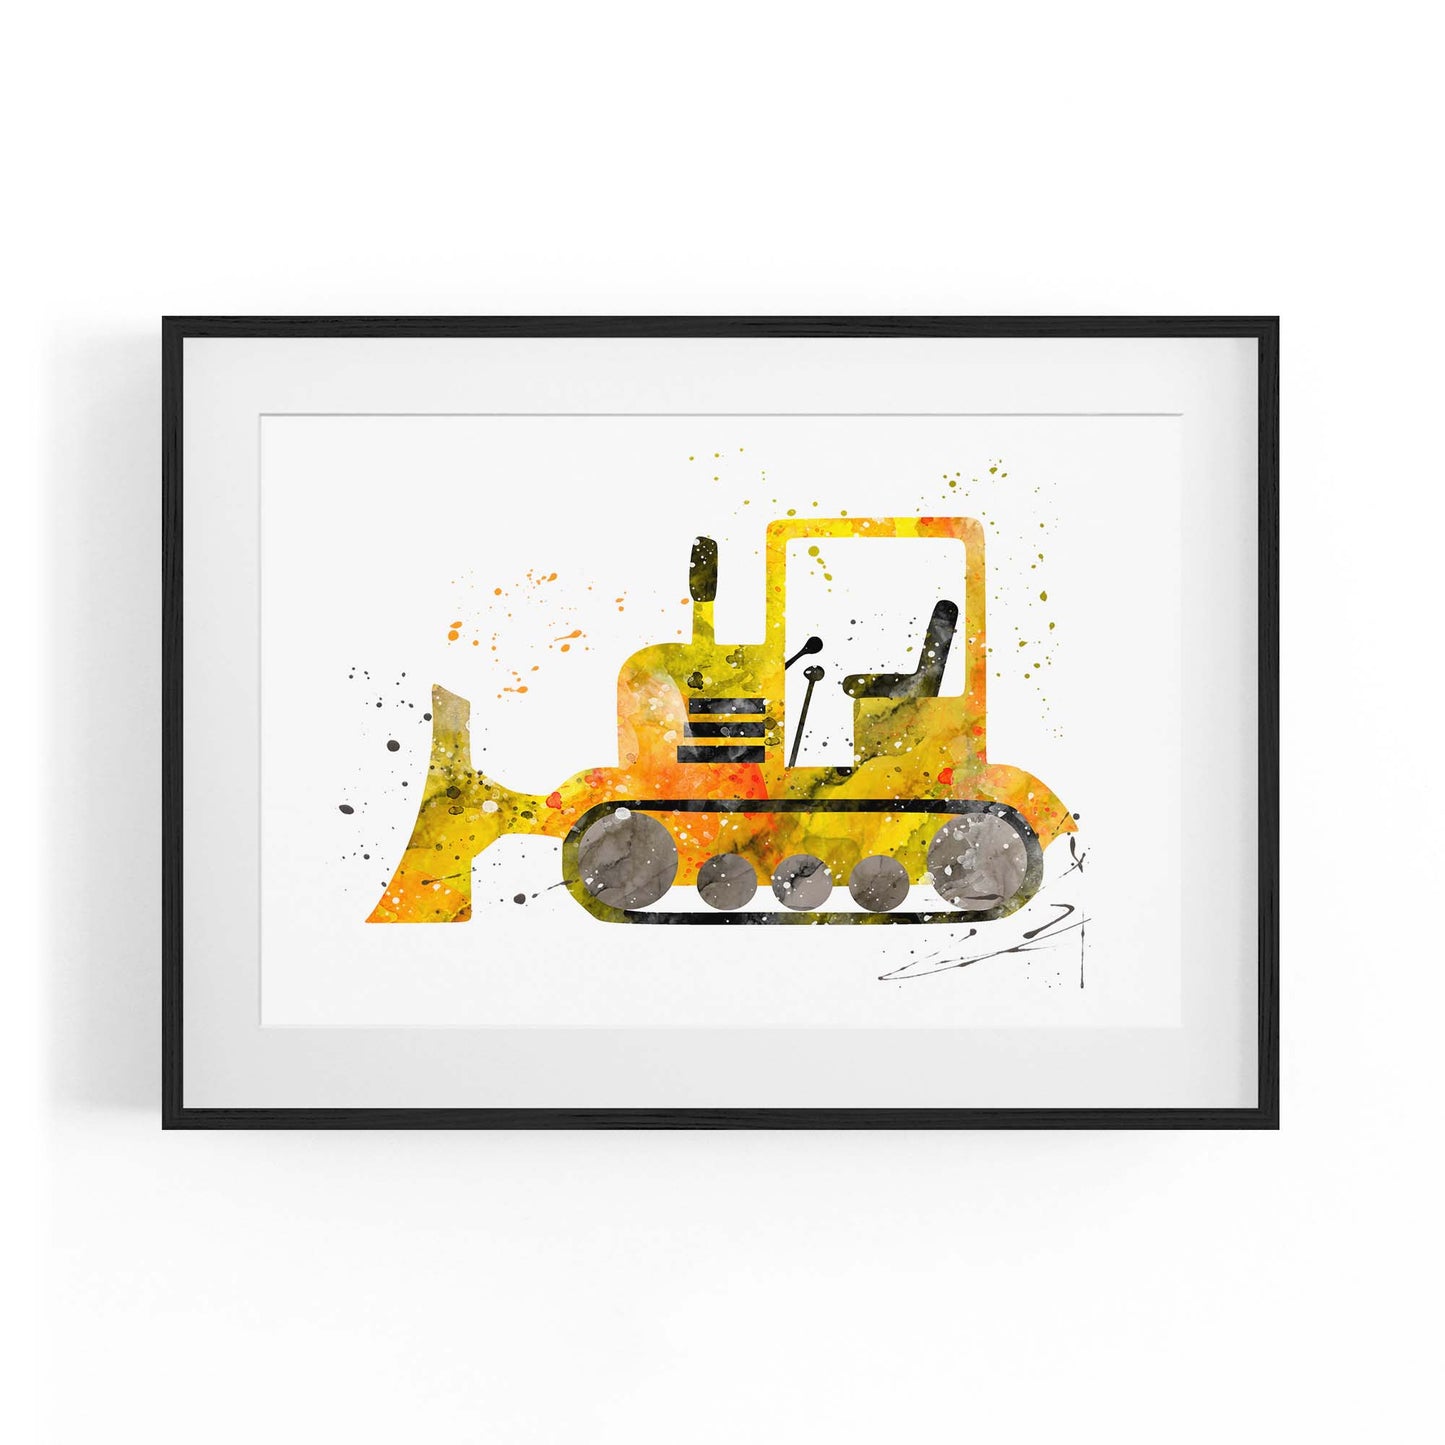 Yellow Digger Boys Bedroom Nursery Toddler Art #1 - The Affordable Art Company